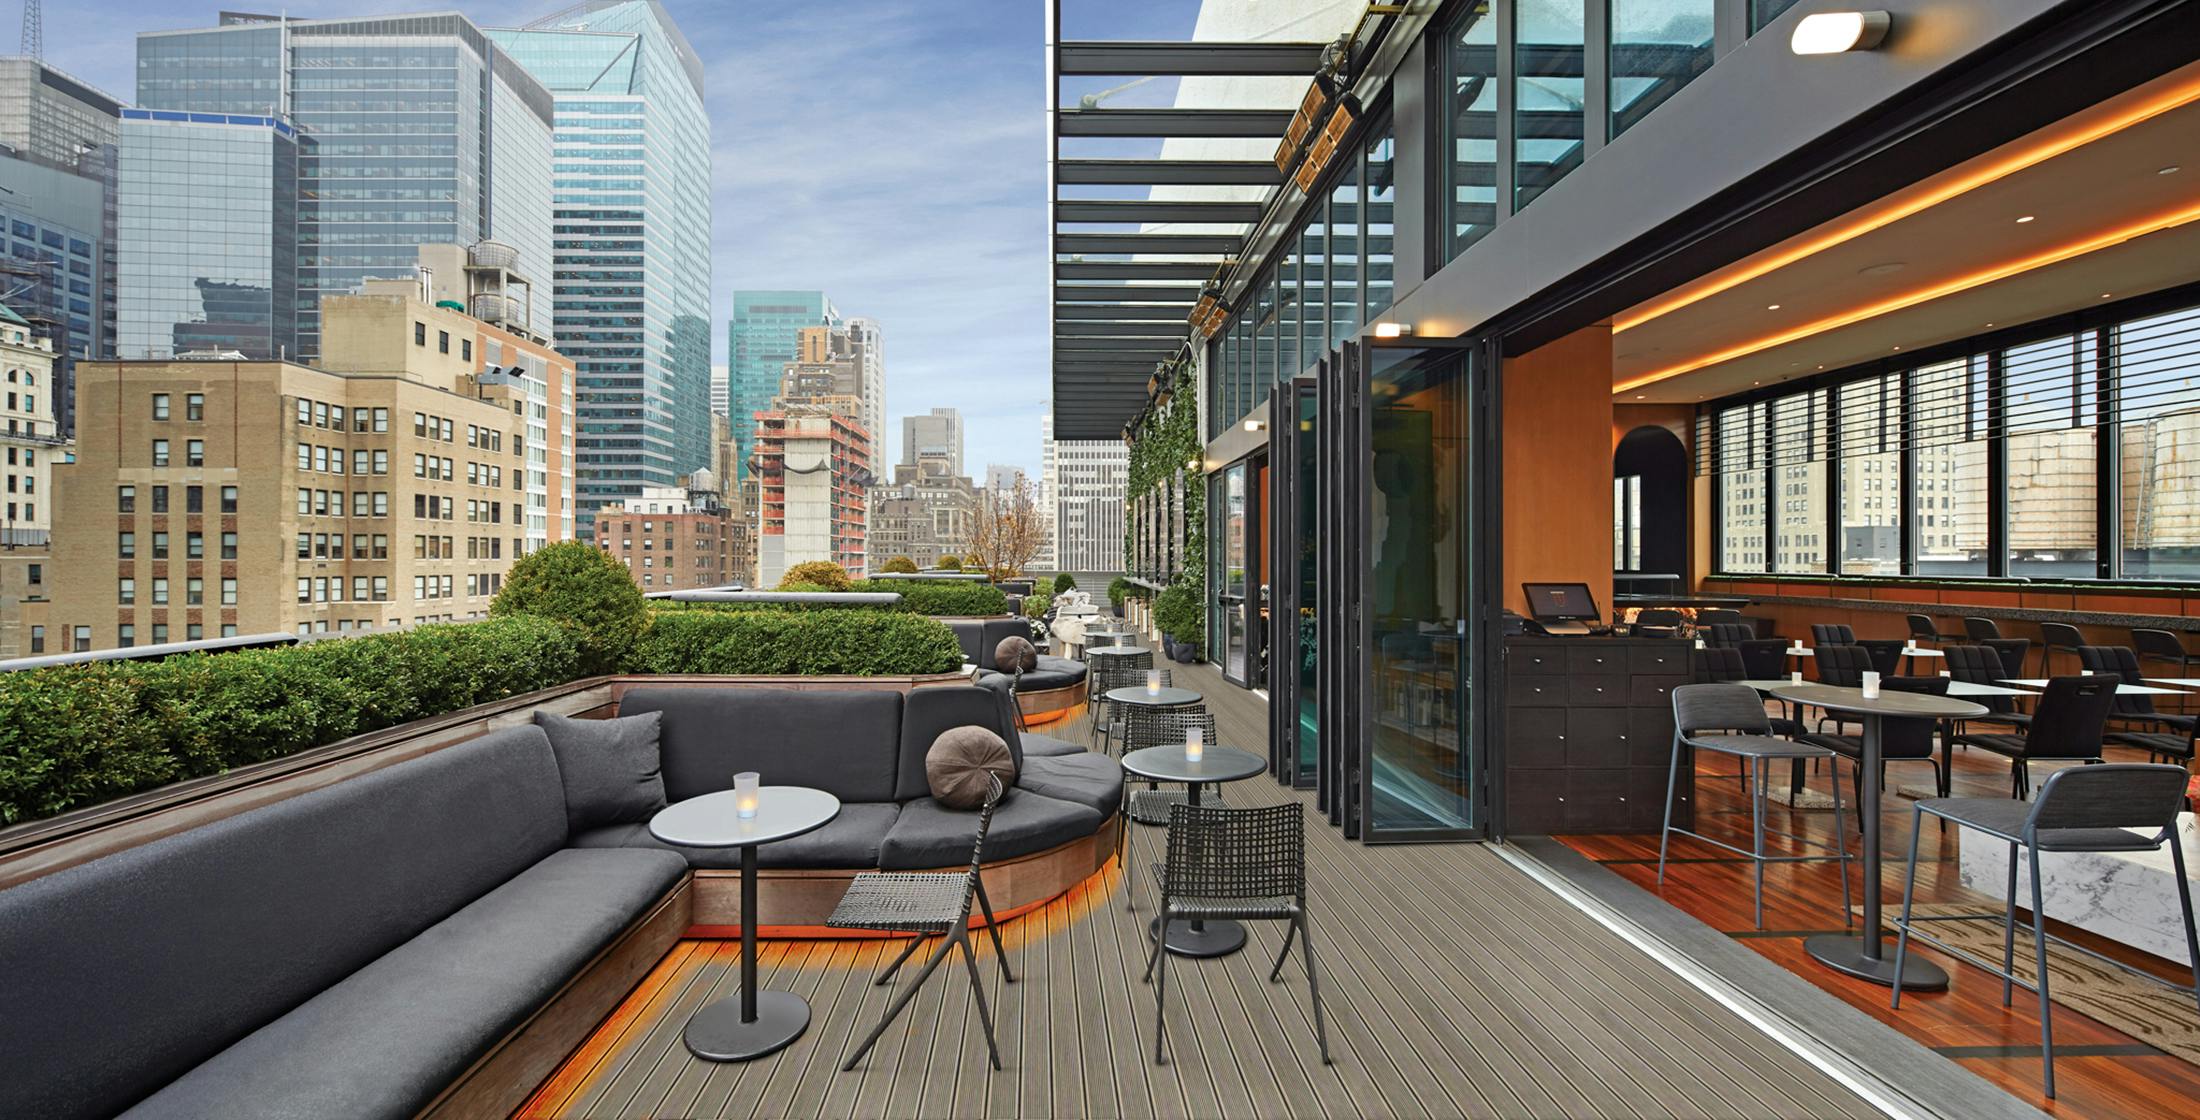 Transform Rooftops: Luxury & Innovation with Opening Glass Walls